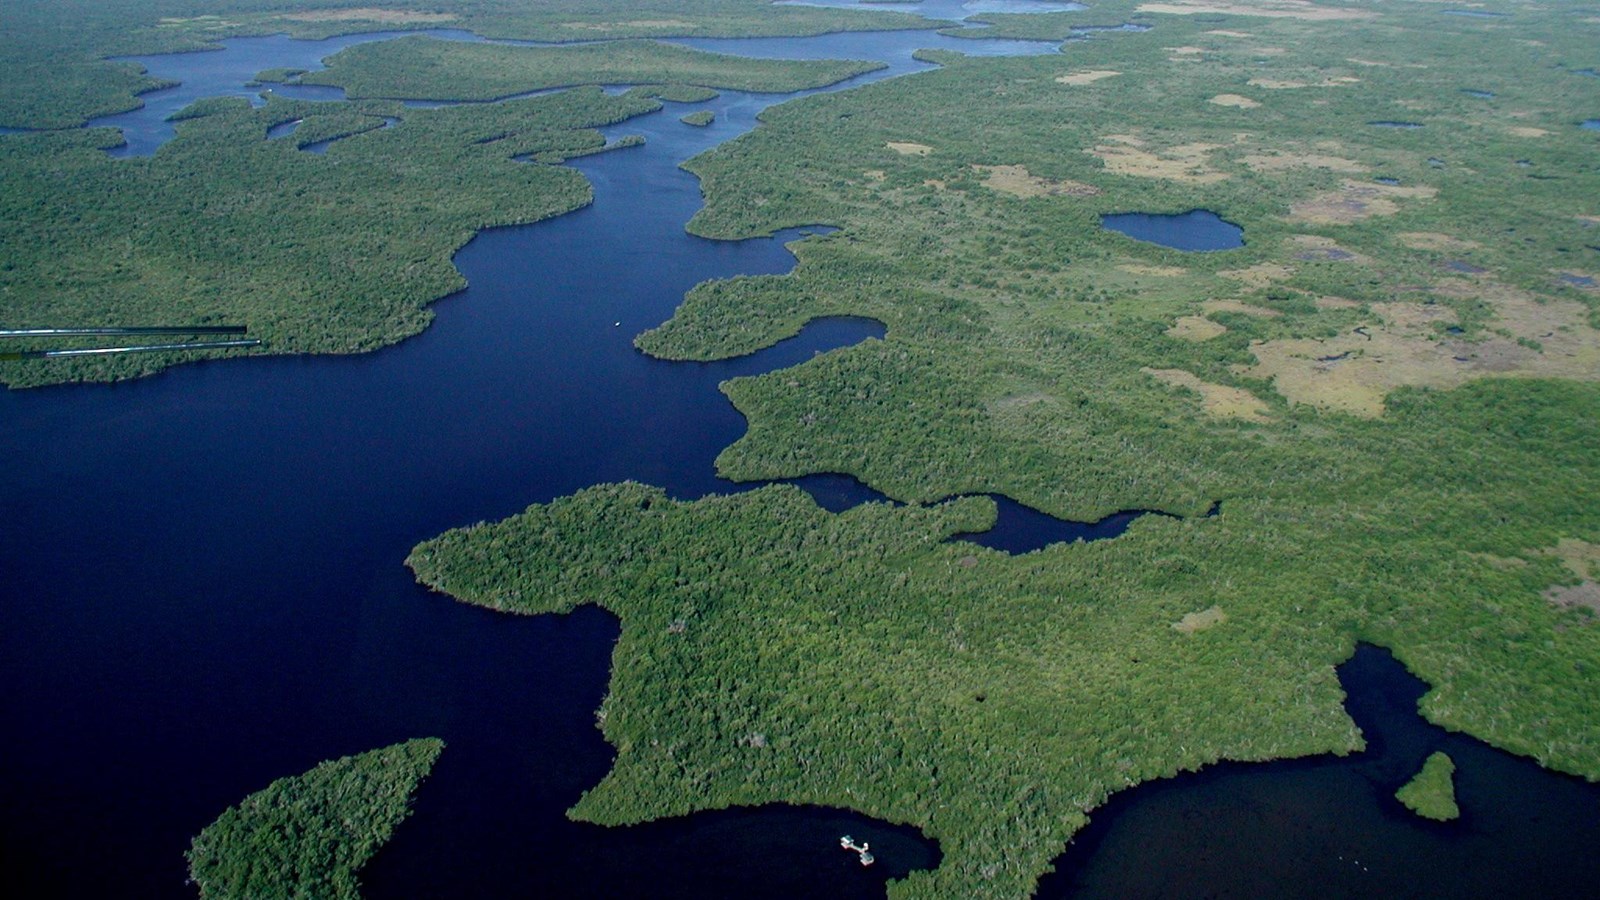 An aerial view of back country paddling trail, with meandering blue waters and green vegetation